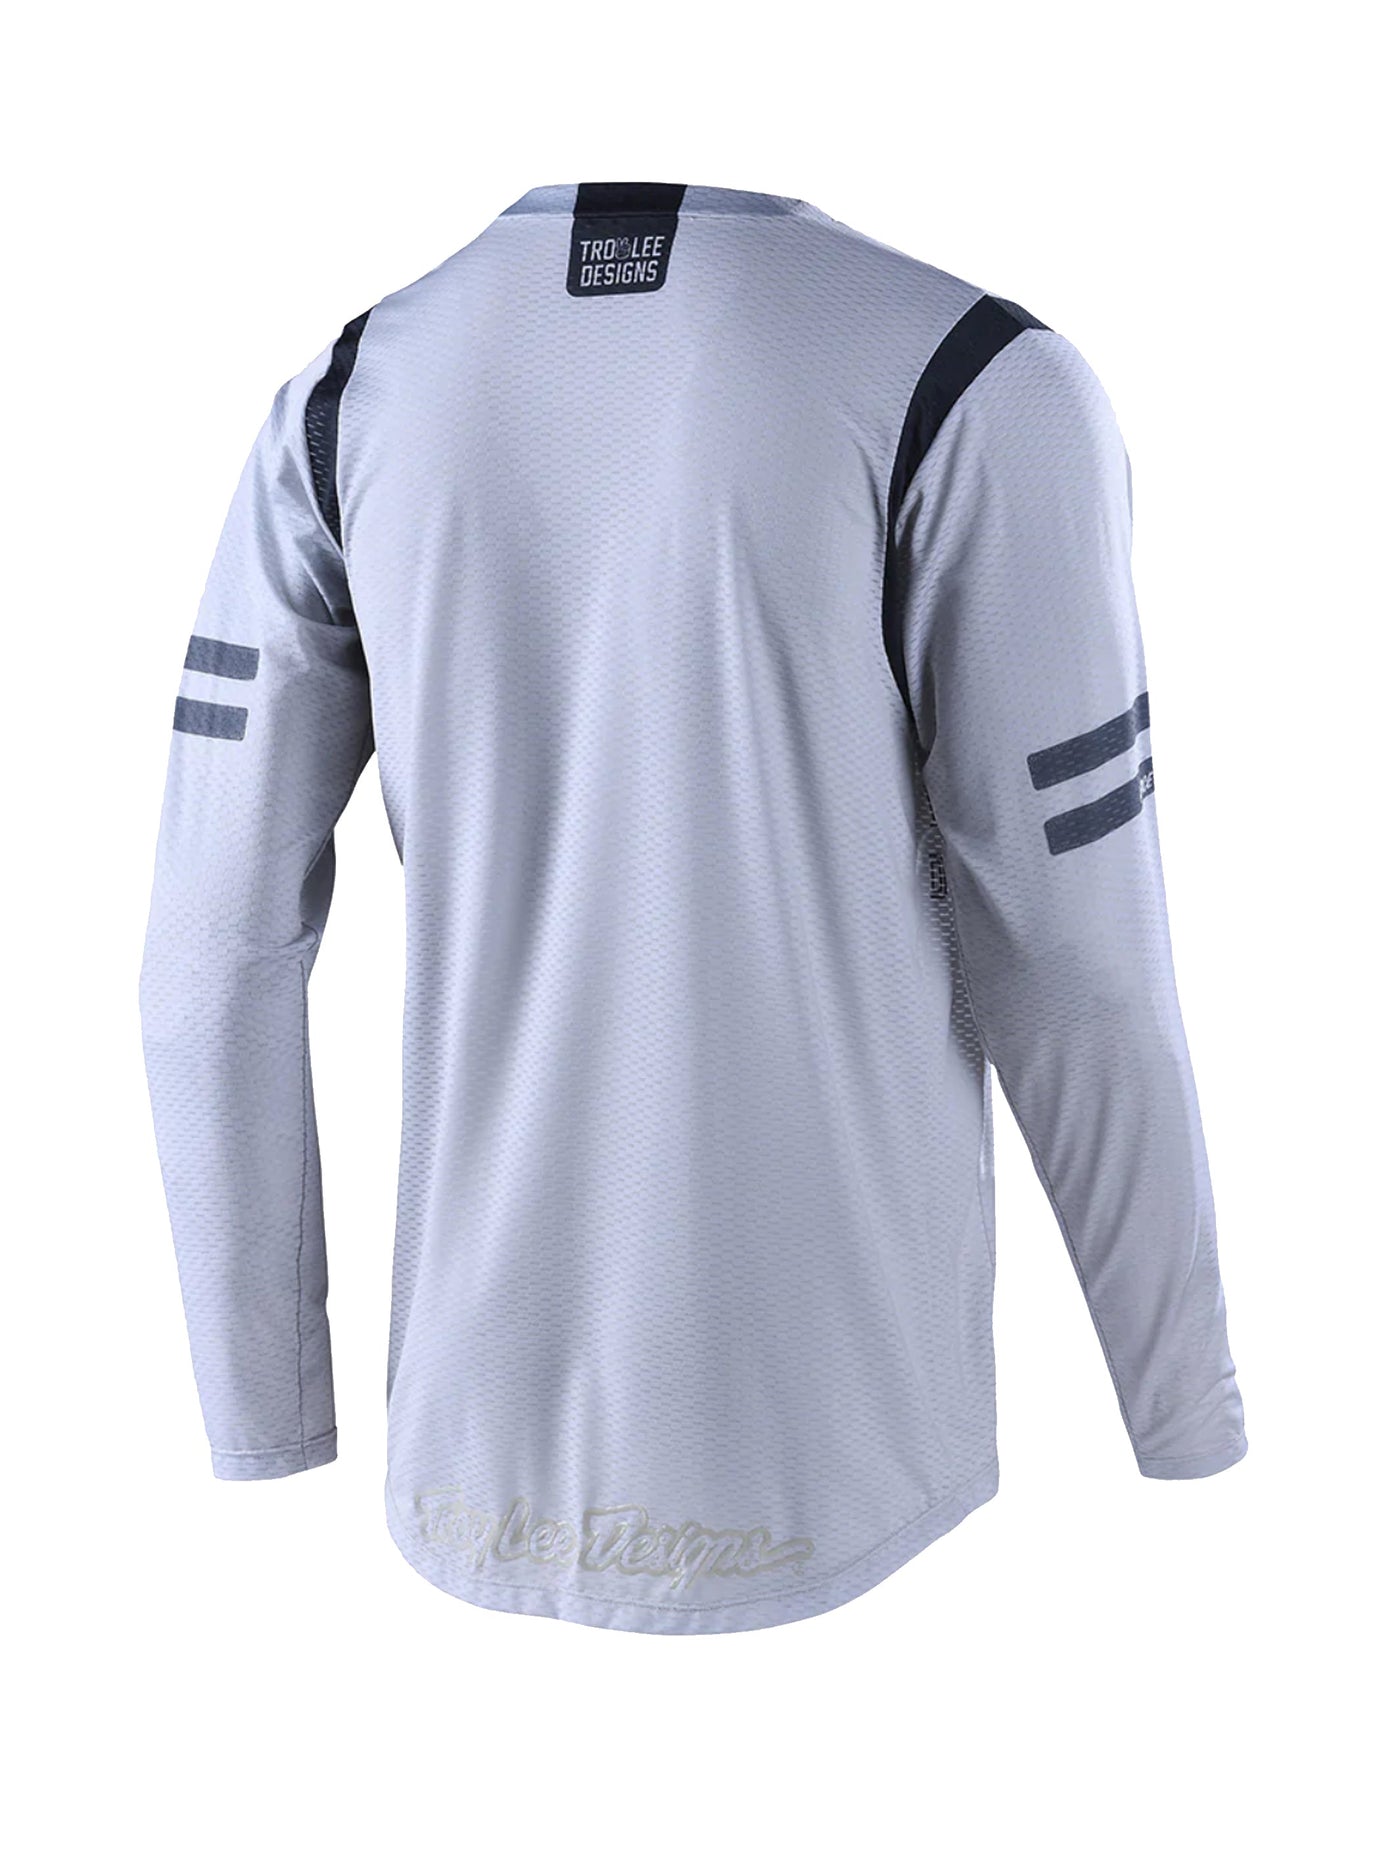 Polera Troy Lee Designs GP air roll out gris - procircuitcl